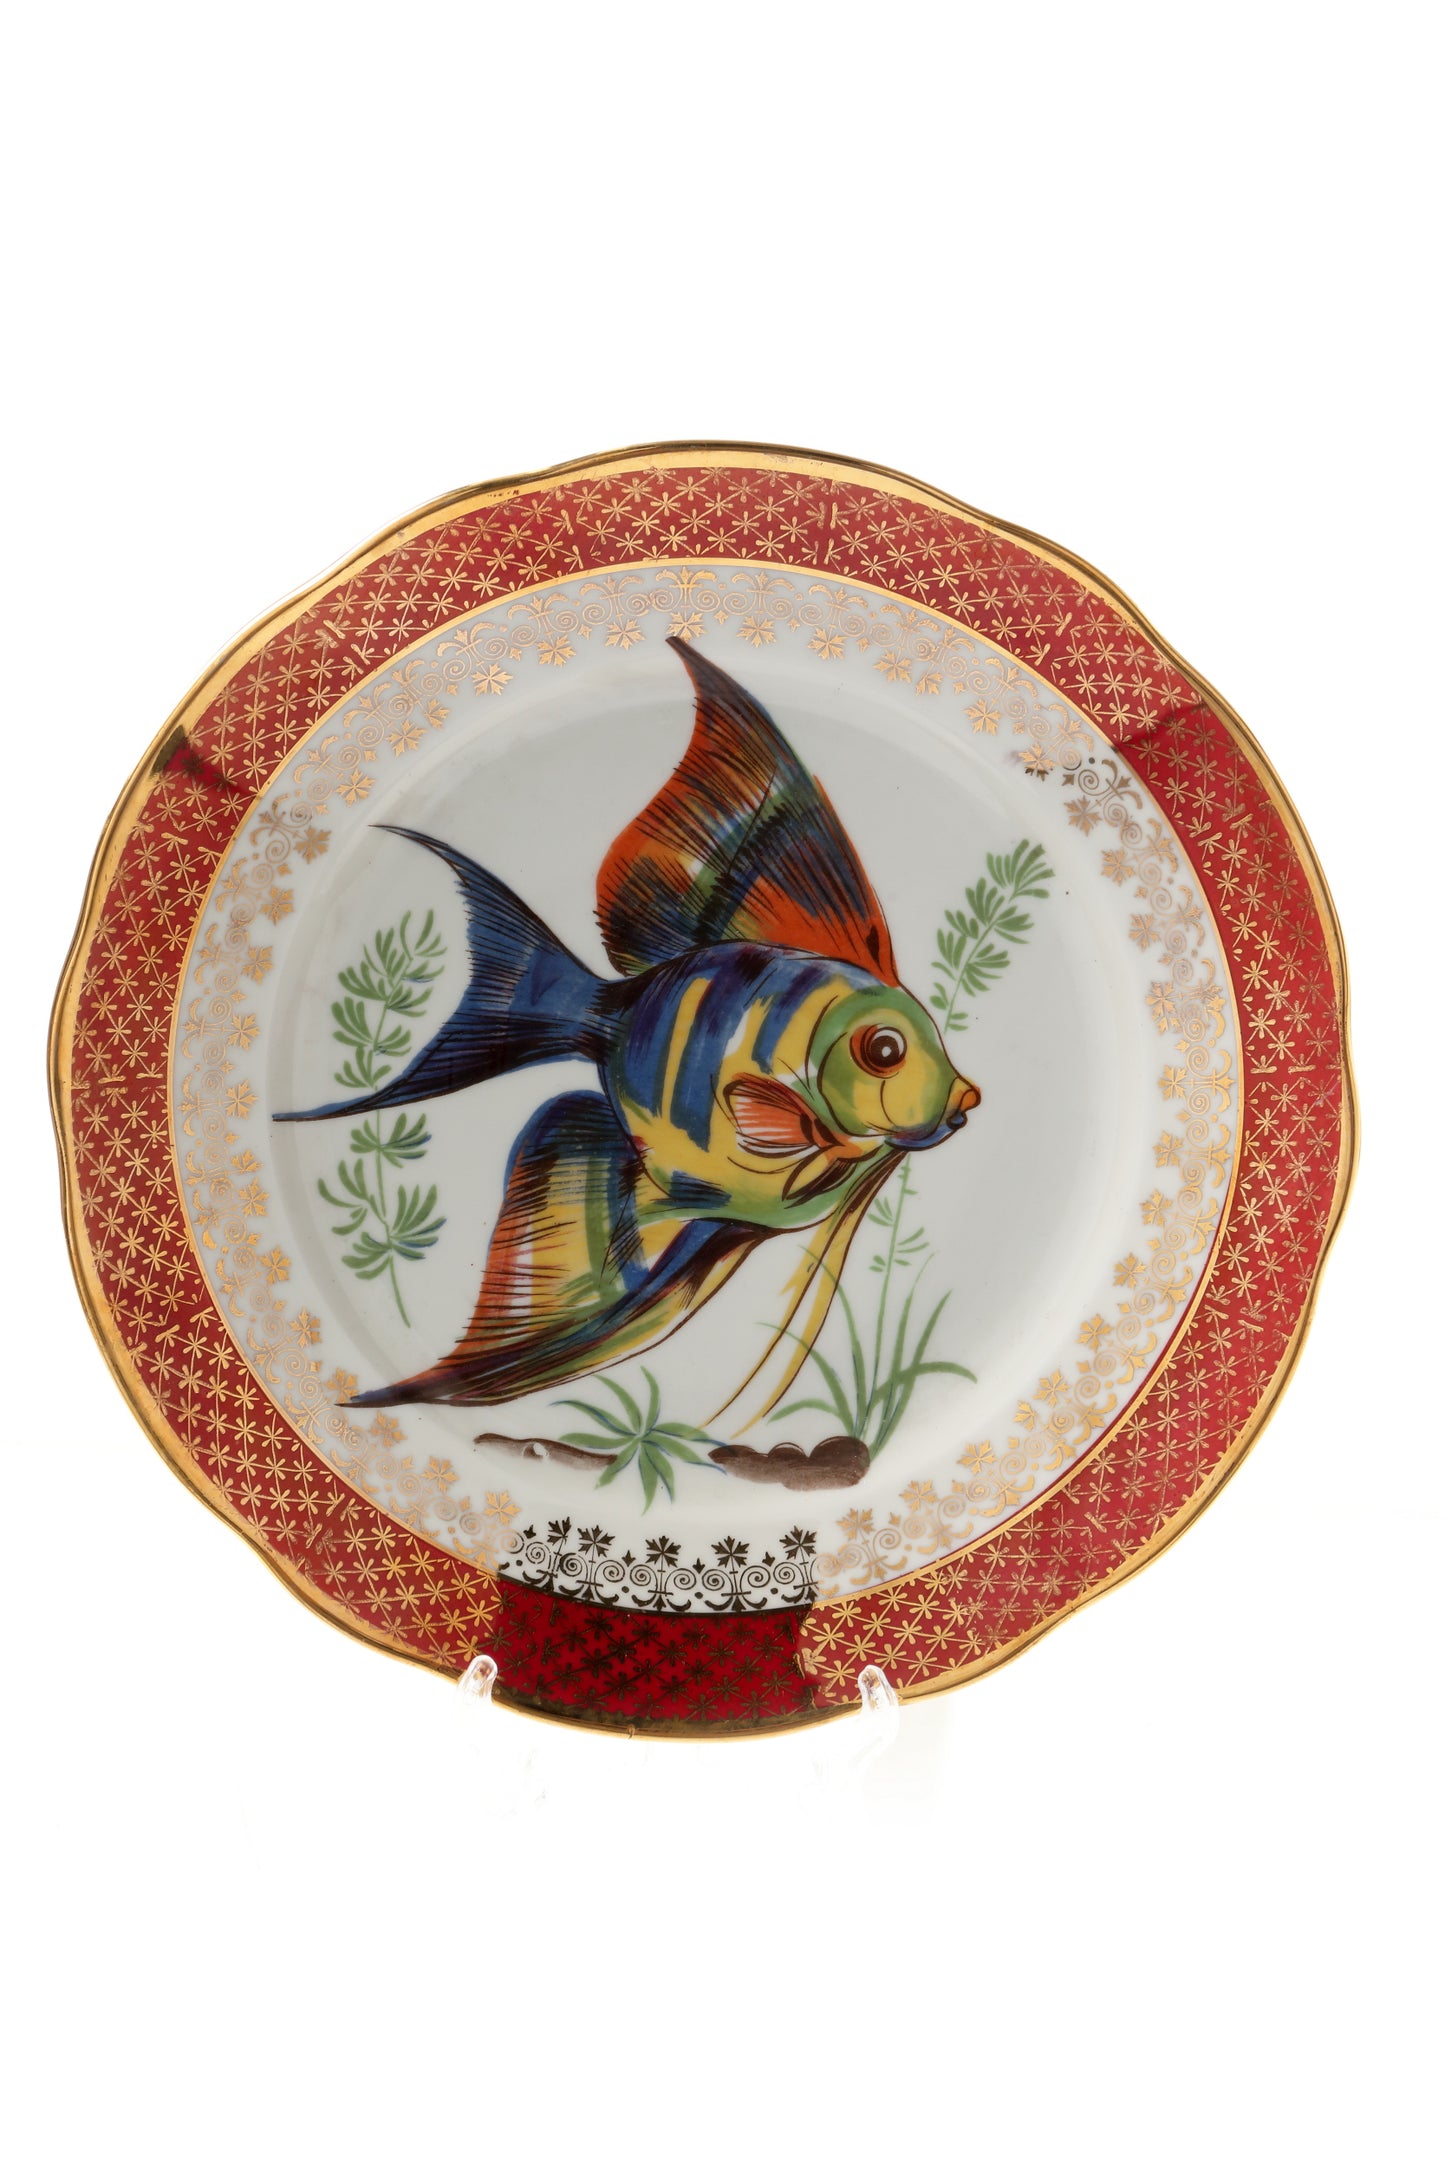 Bavaria fish plate set from the 1950s